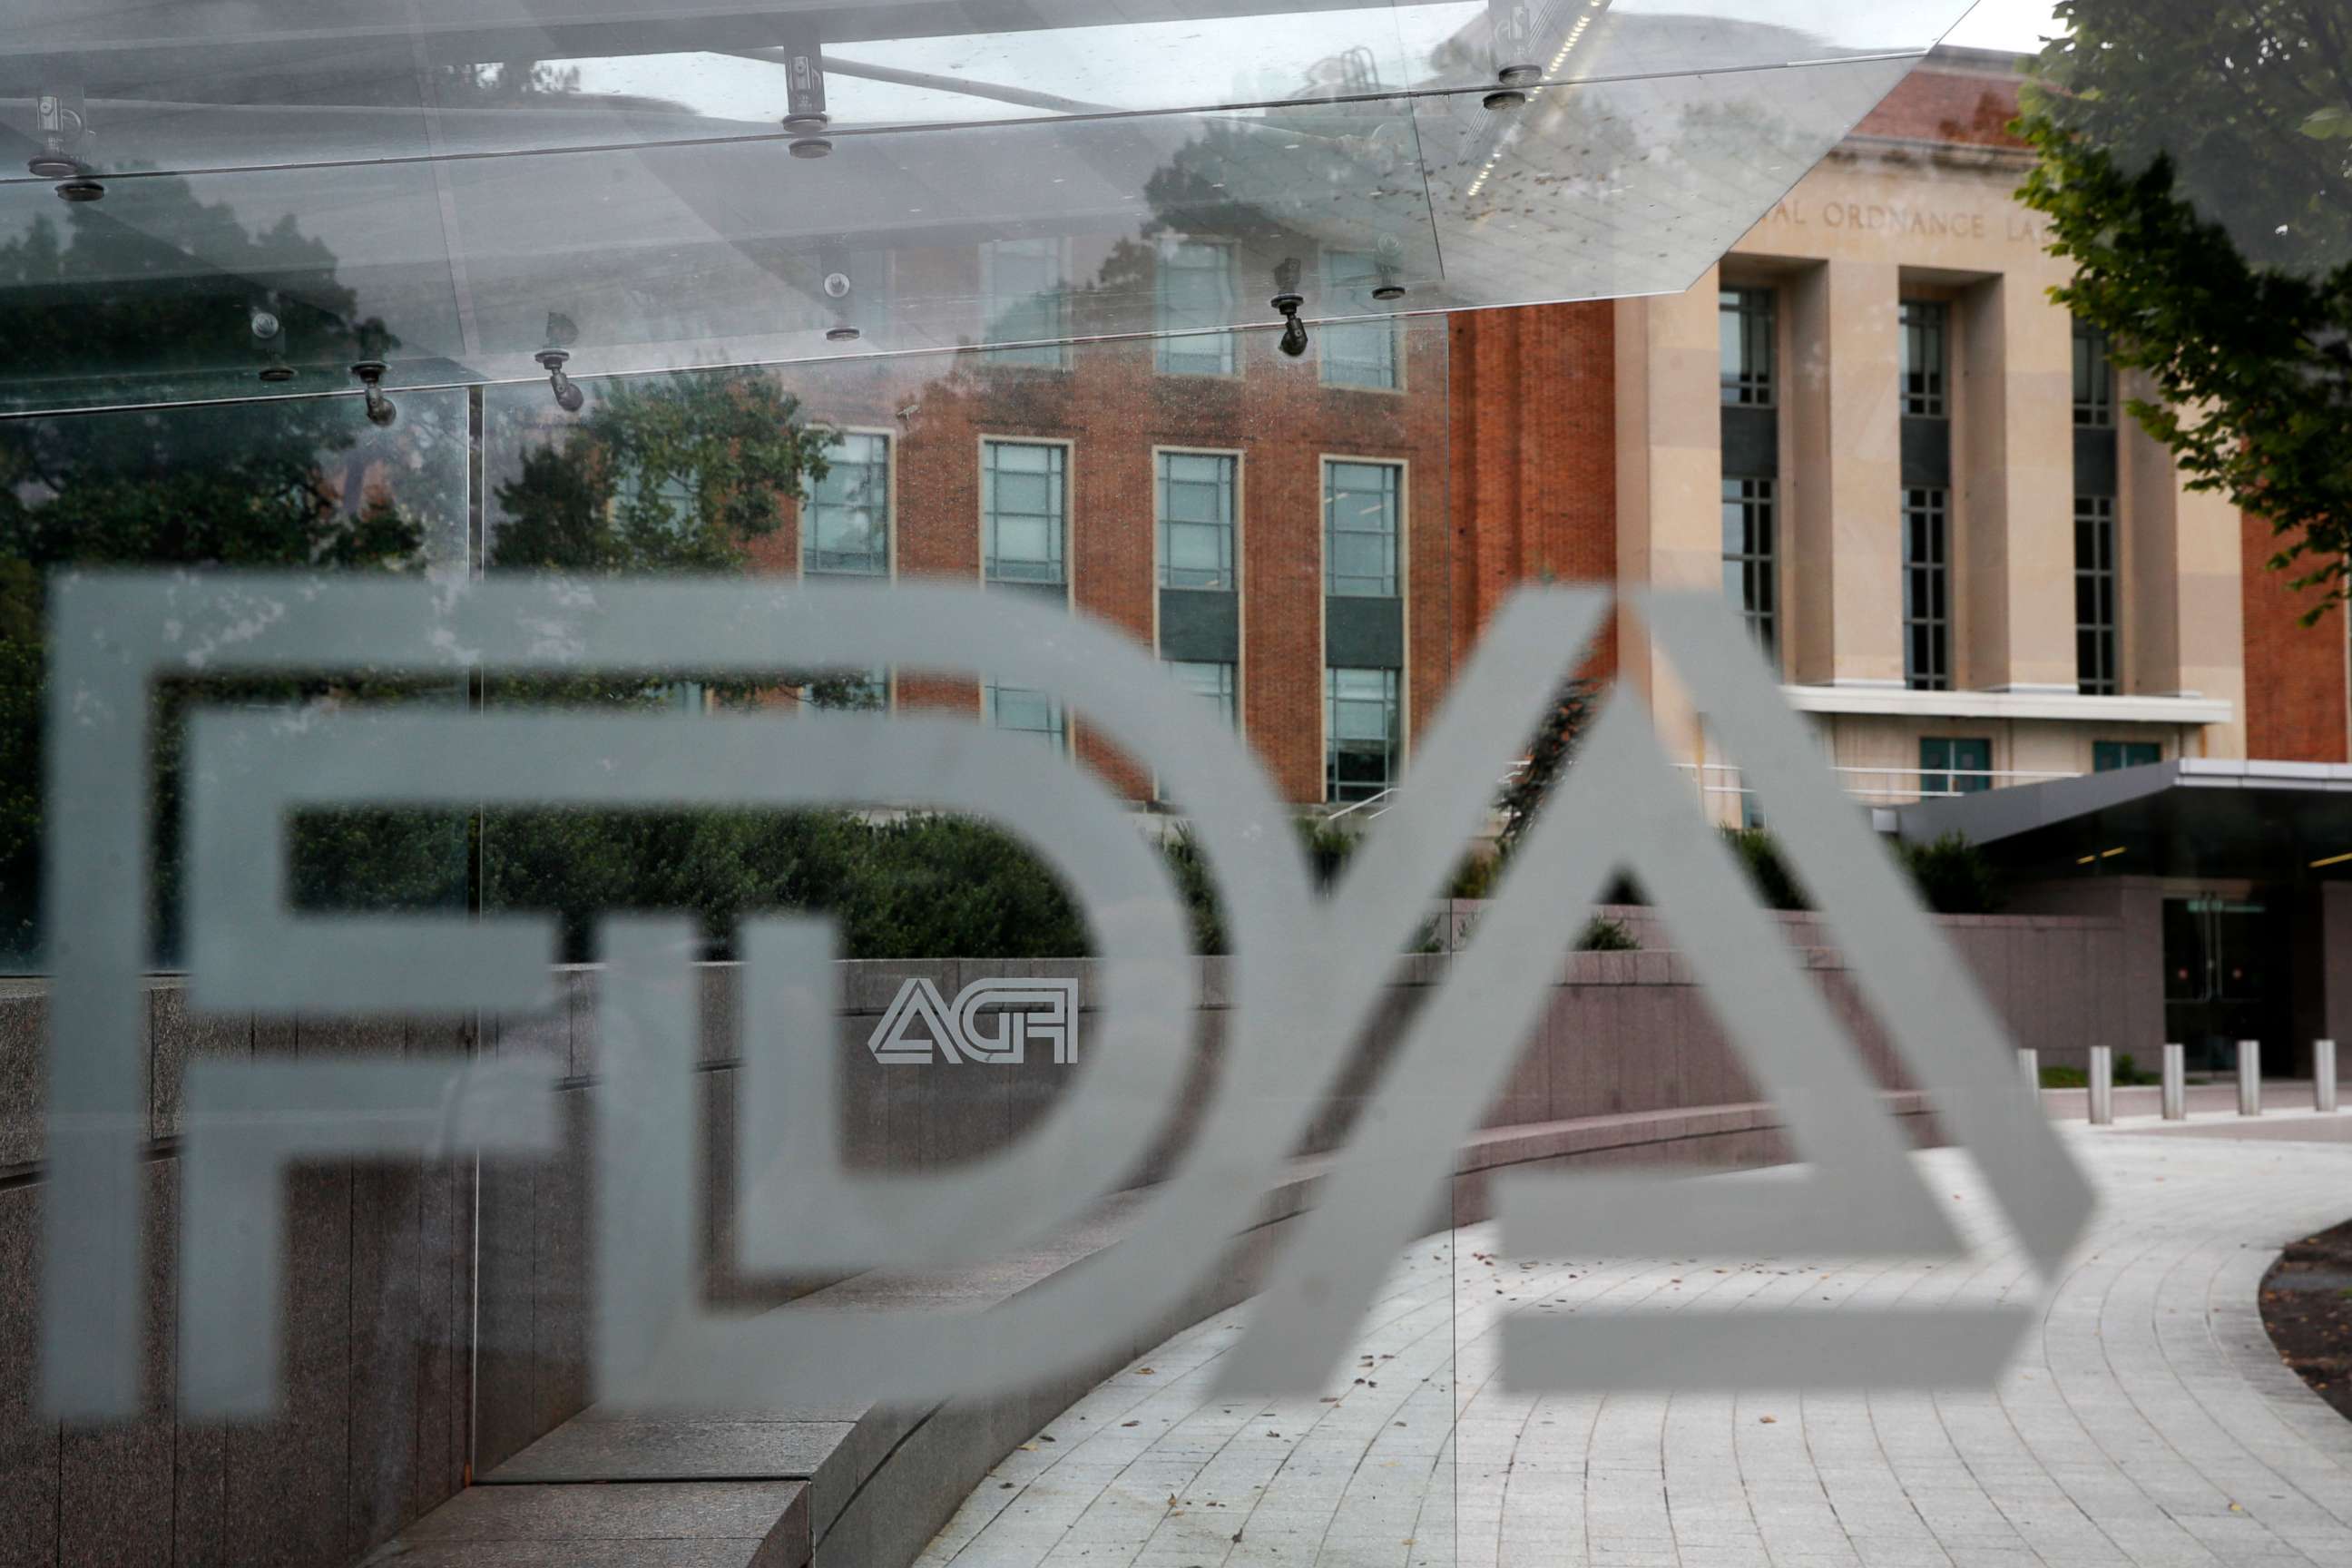 PHOTO: In this Aug. 2, 2018, file photo, the U.S. Food and Drug Administration building is seen behind FDA logos at a bus stop on the agency's campus in Silver Spring, Md.